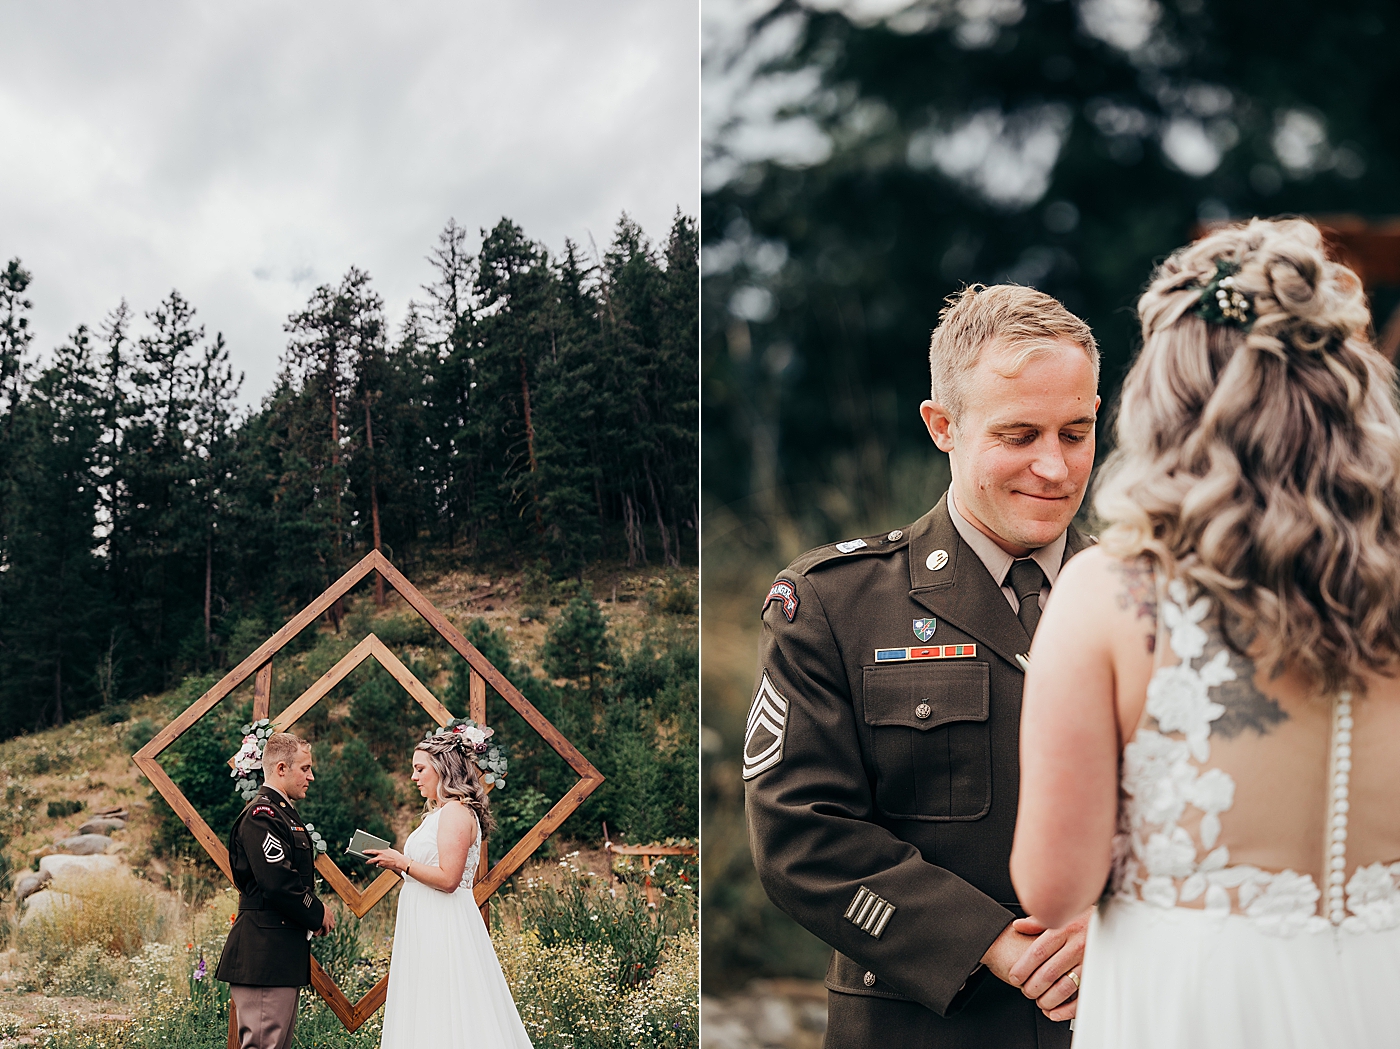 Bride and groom exchanging vows during elopement. Photo by Megan Montalvo Photography.